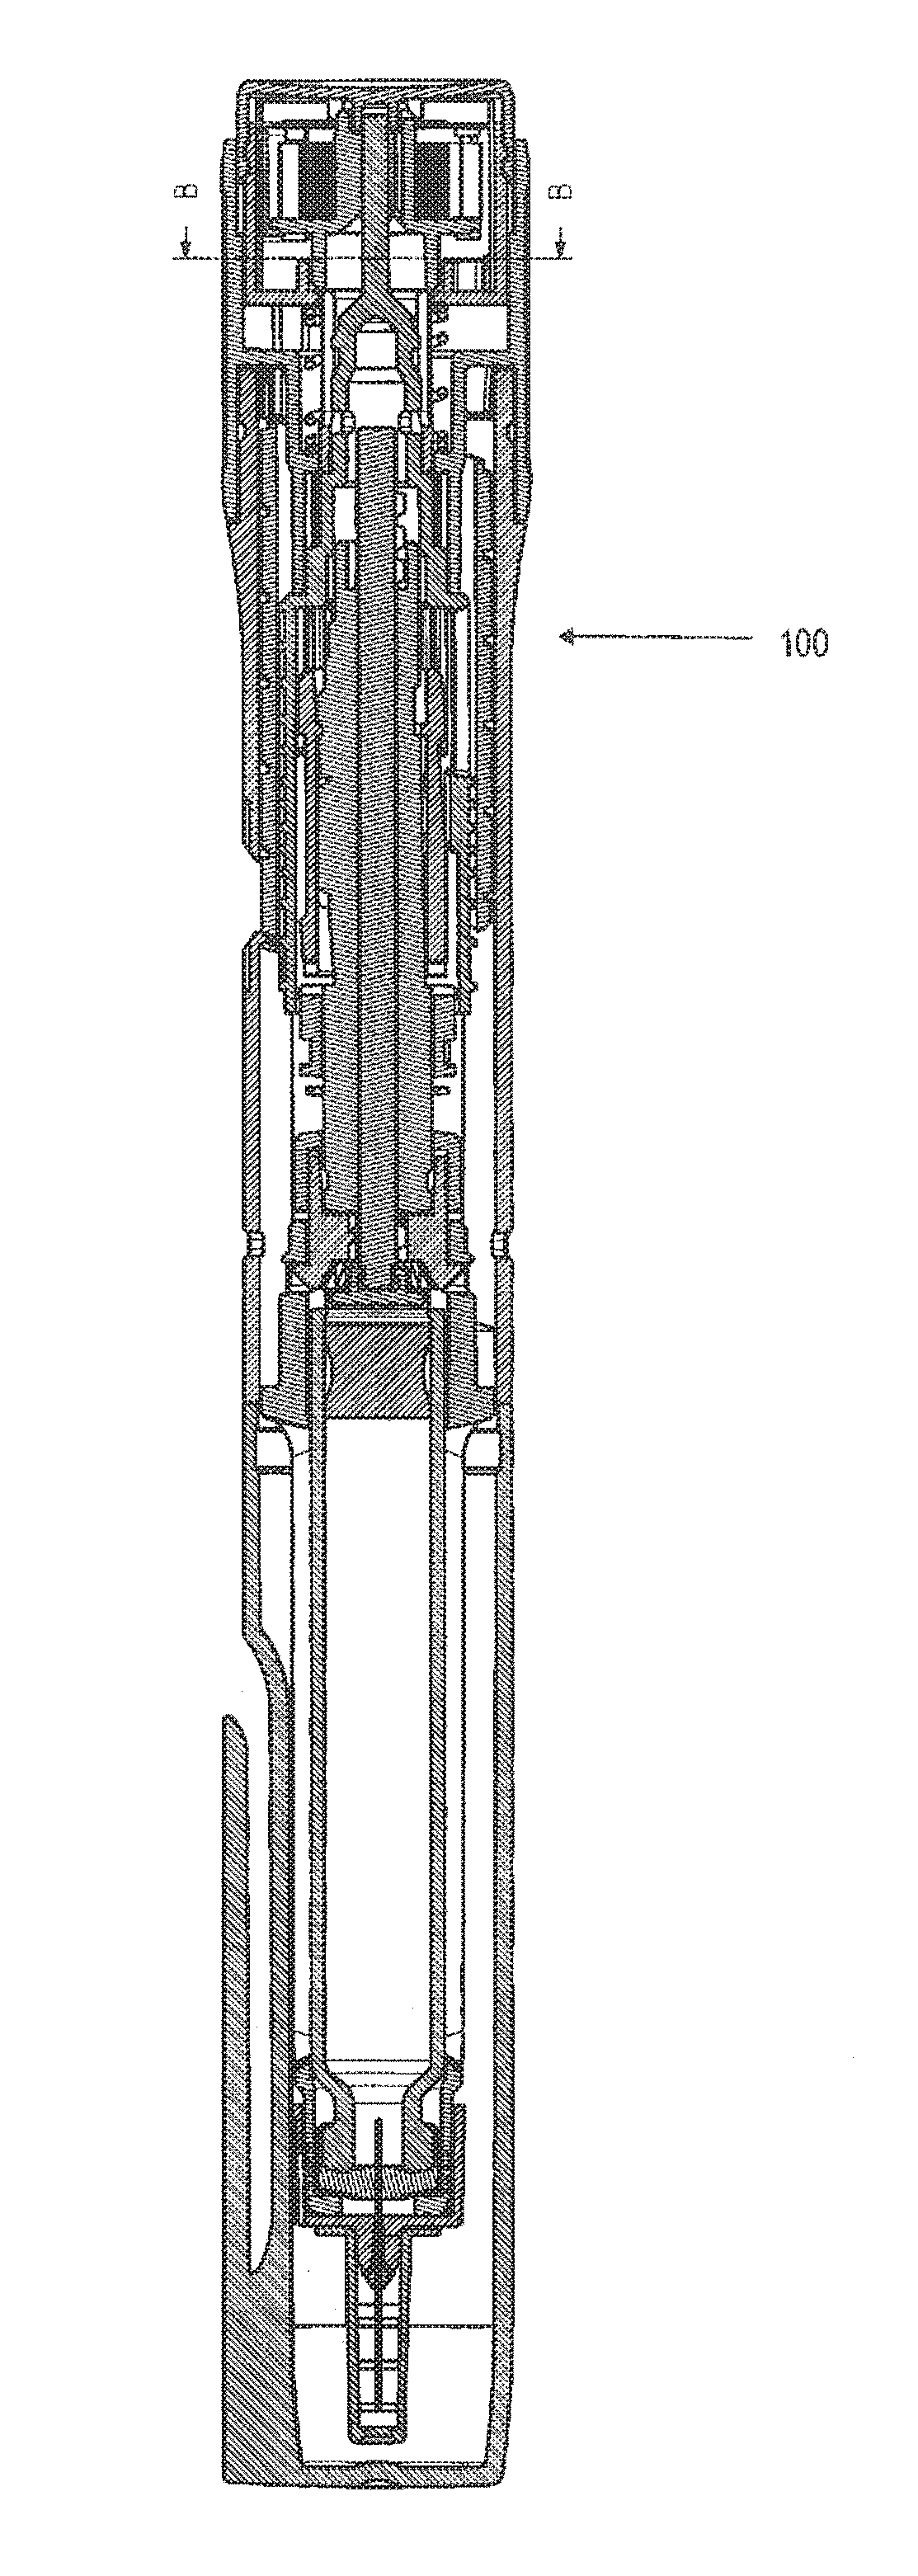 Drive unit and injection device